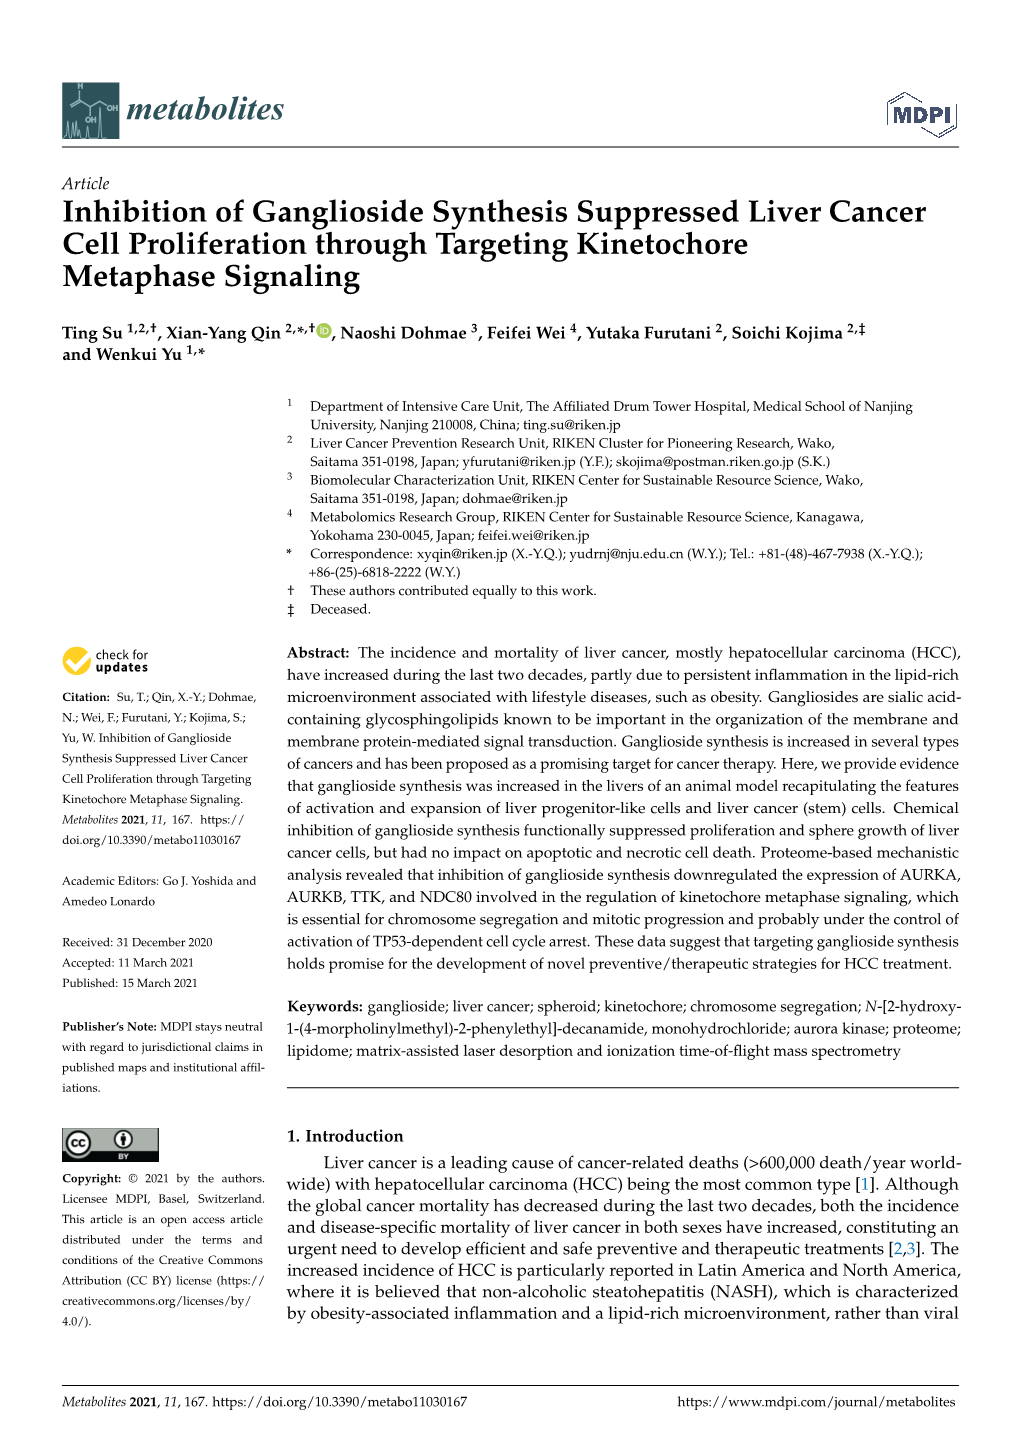 Inhibition of Ganglioside Synthesis Suppressed Liver Cancer Cell Proliferation Through Targeting Kinetochore Metaphase Signaling